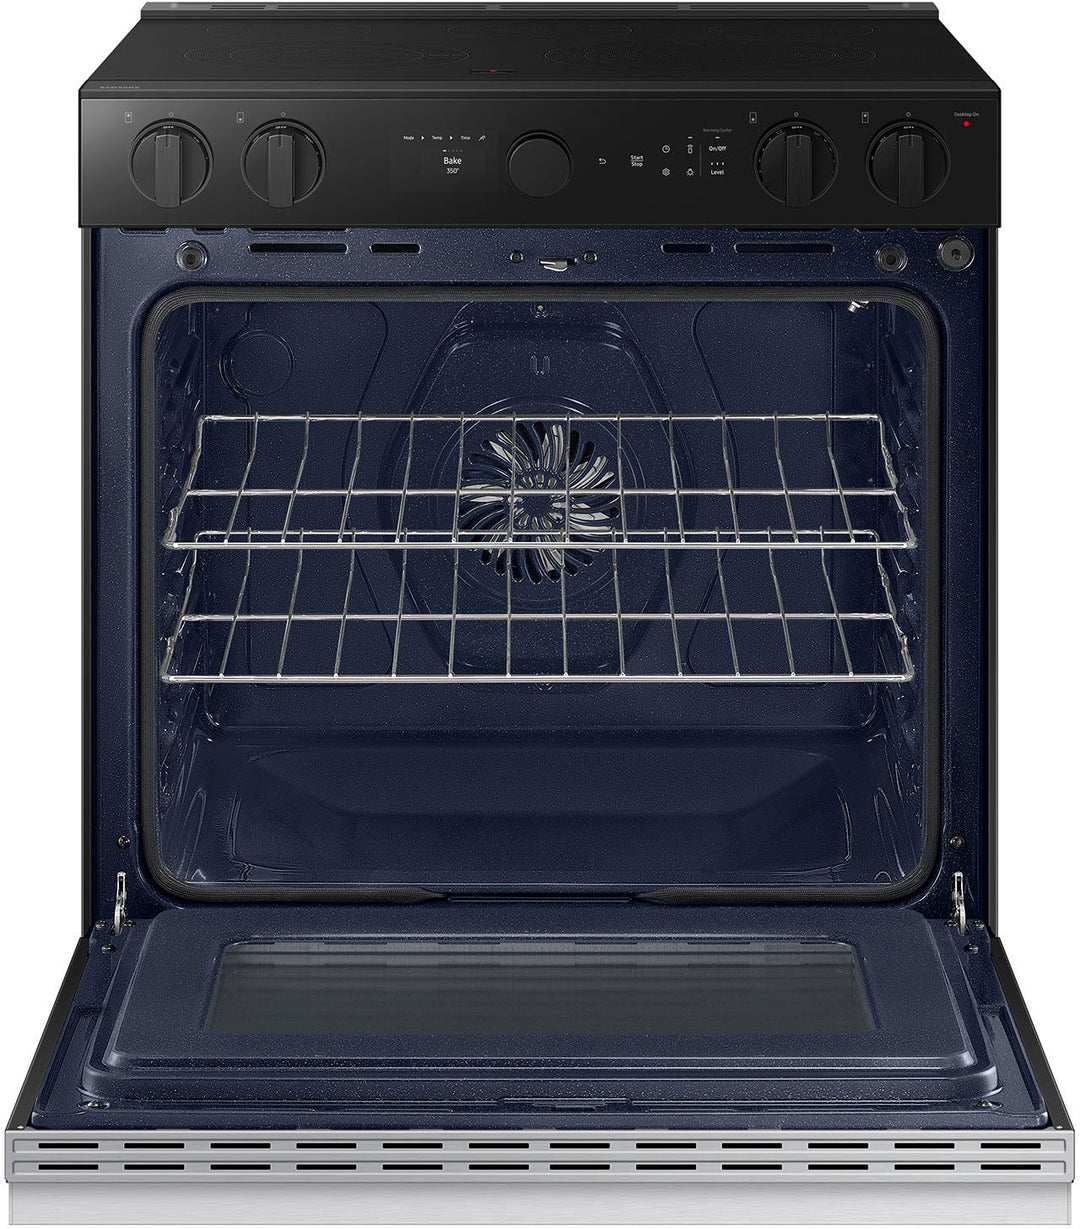 Samsung - Bespoke 6.3 Cu. Ft. Slide-In Electric Range with Air Sous Vide - Stainless Steel_3